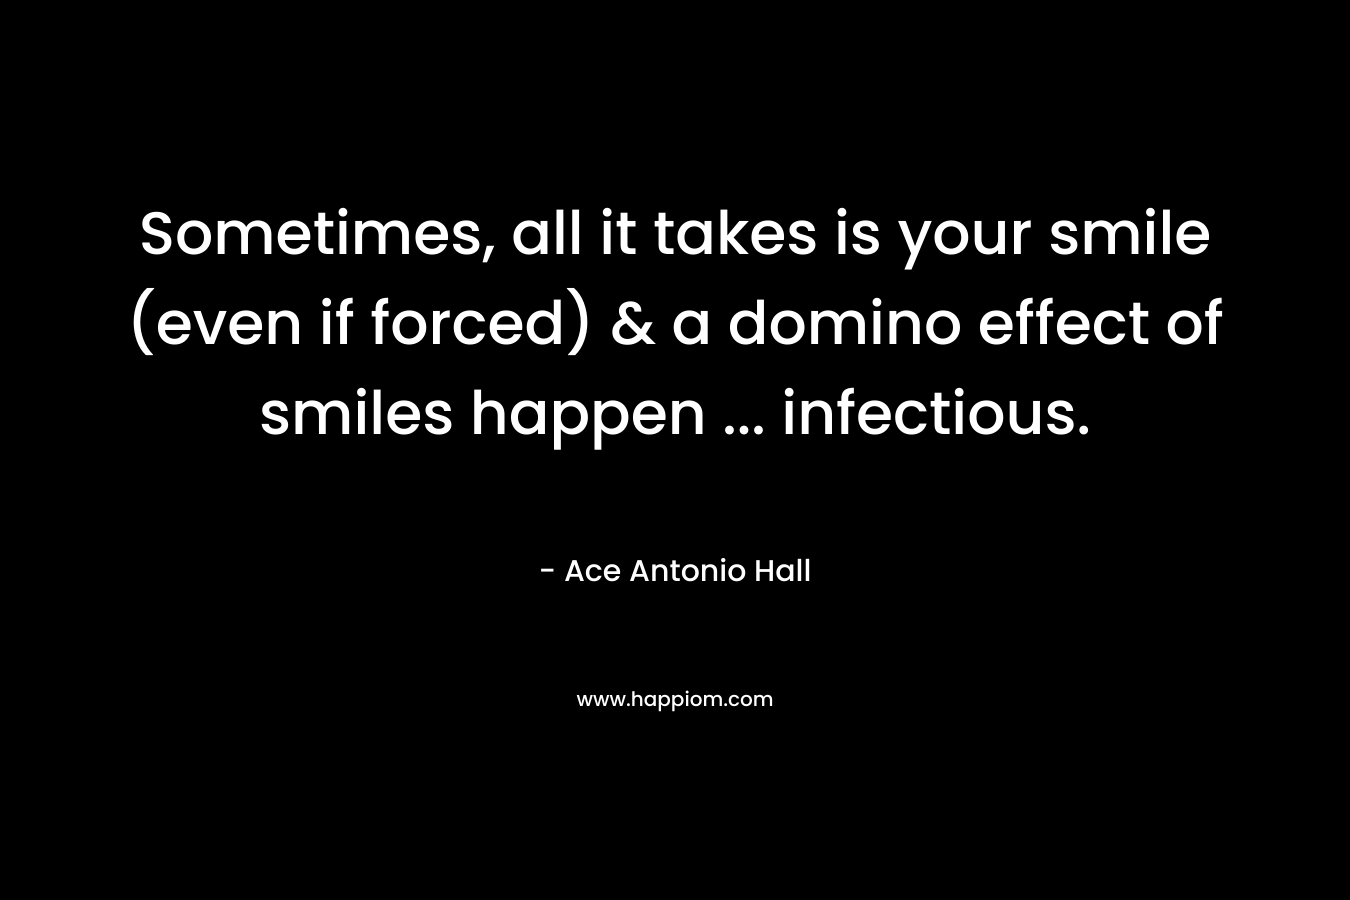 Sometimes, all it takes is your smile (even if forced) & a domino effect of smiles happen ... infectious.